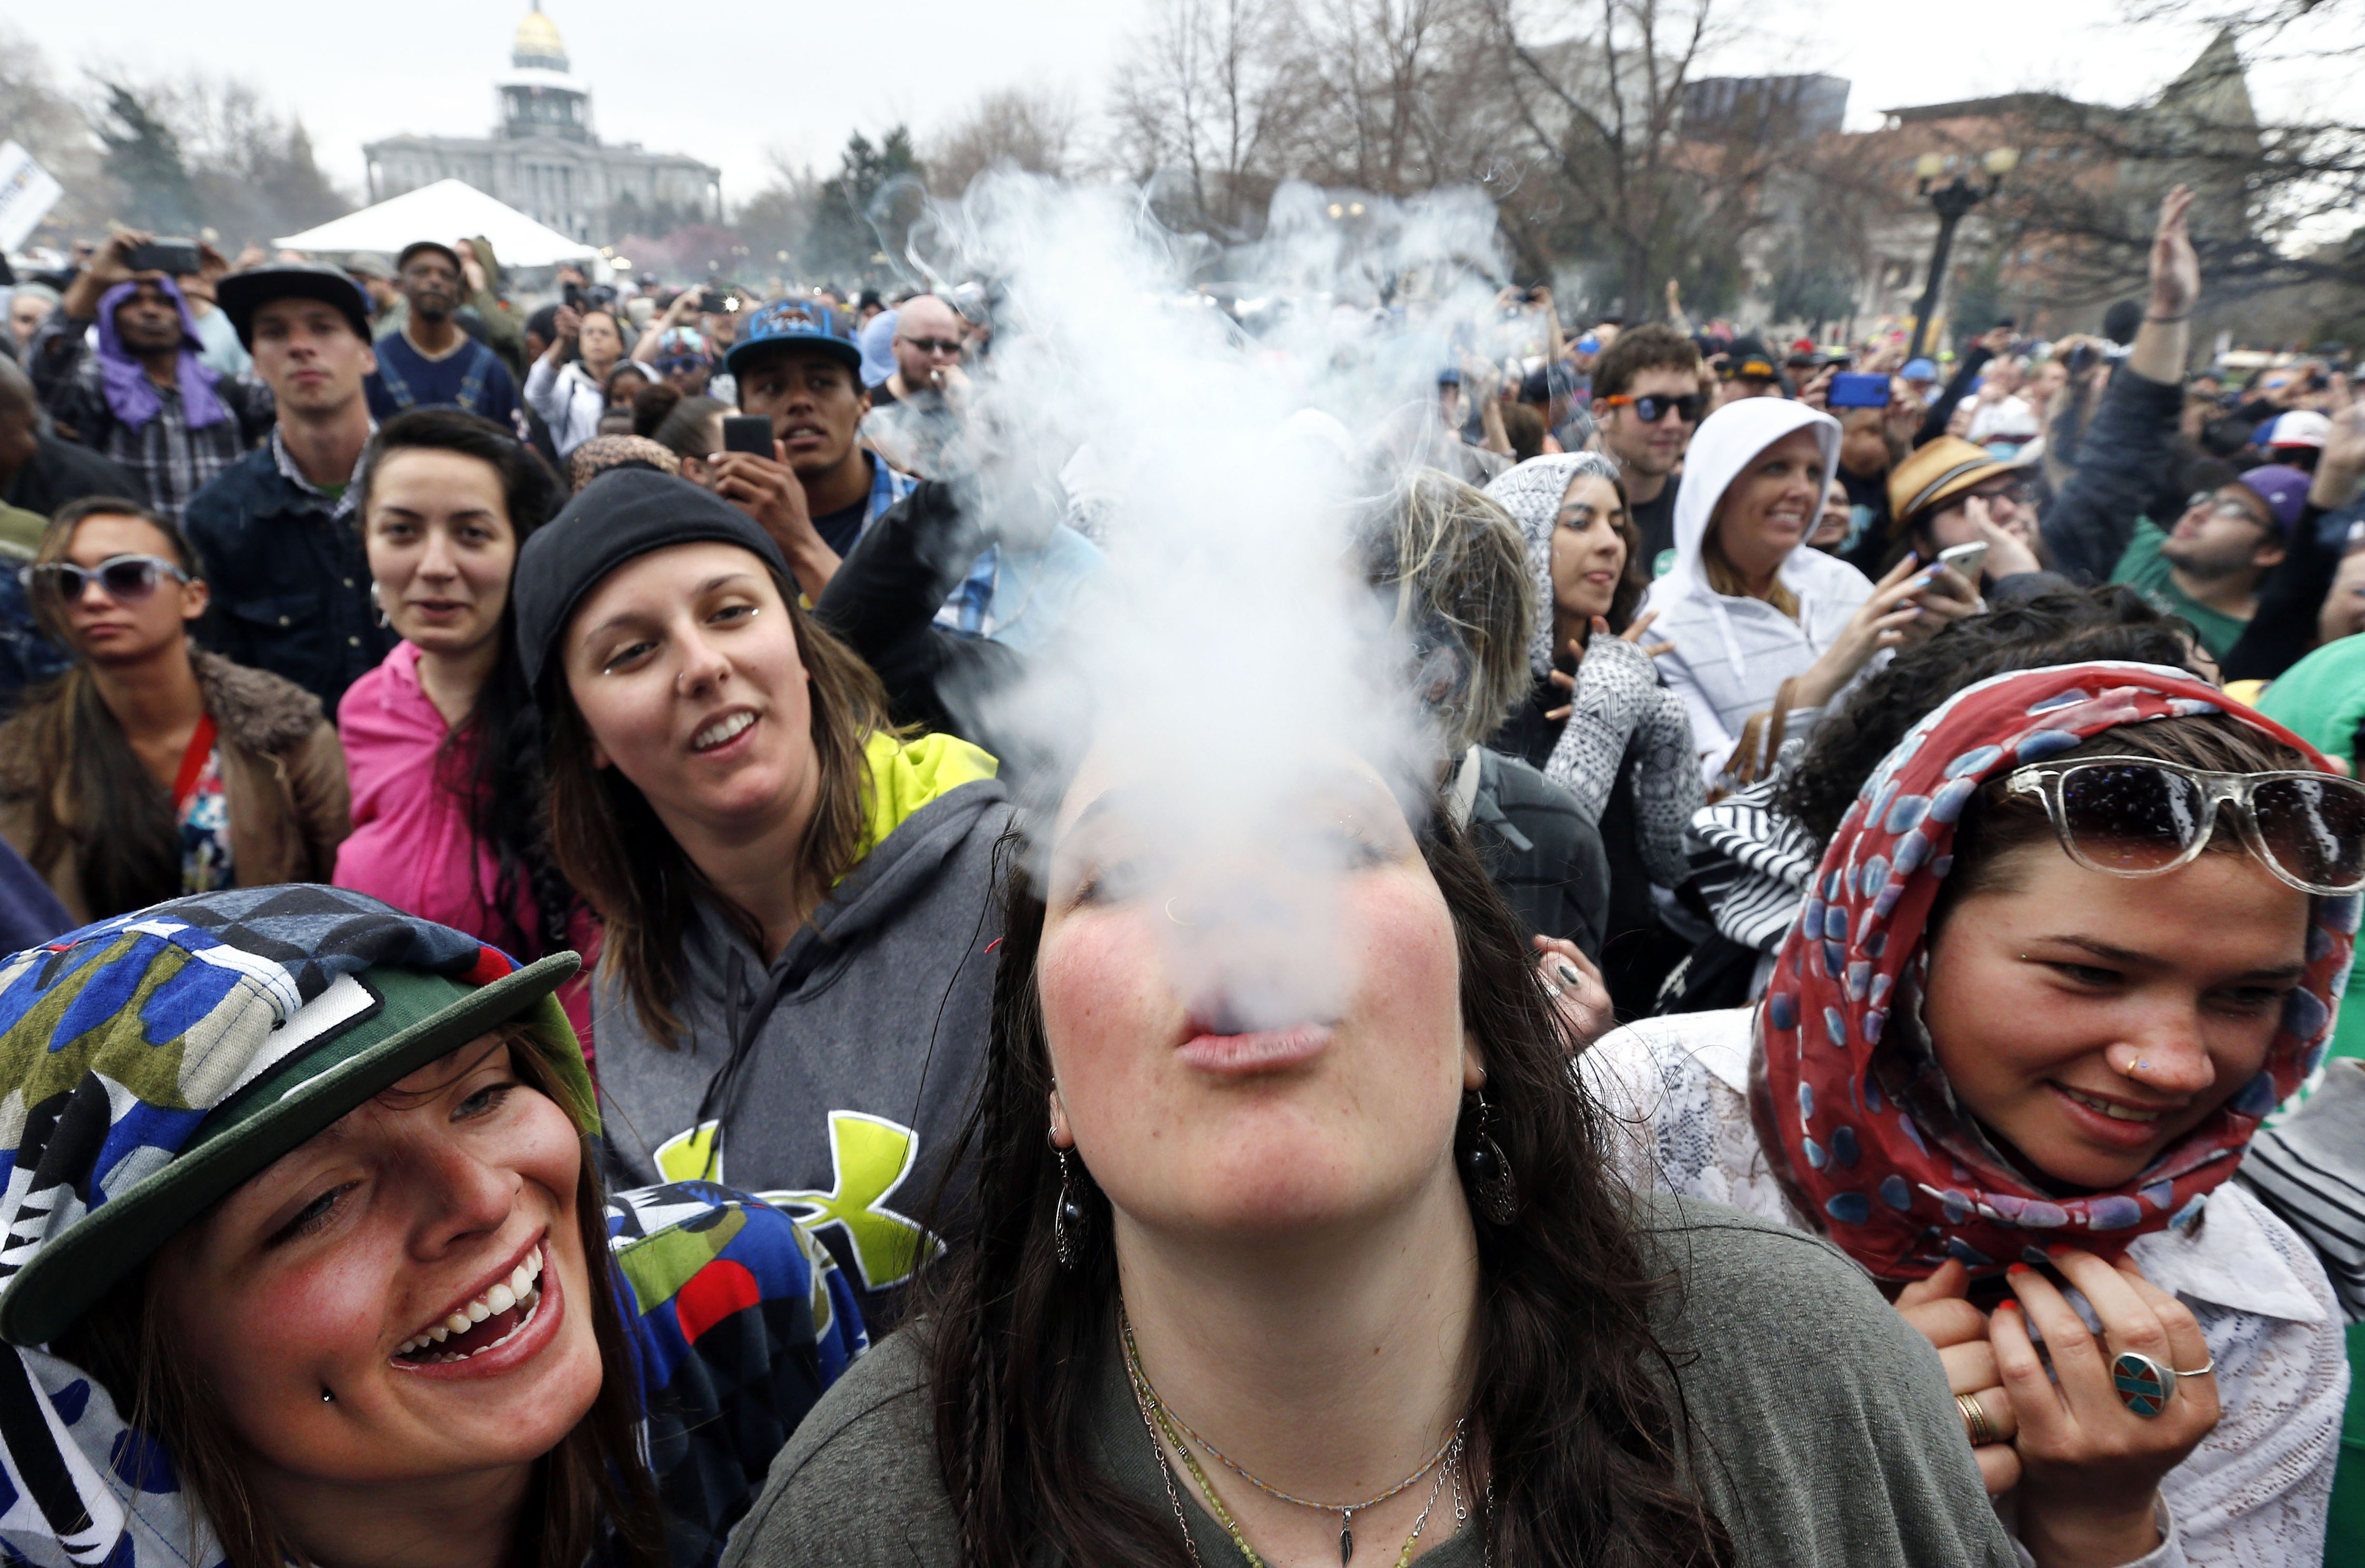 6 Tips to Ensure You Enjoy Your First (Legal) Toke